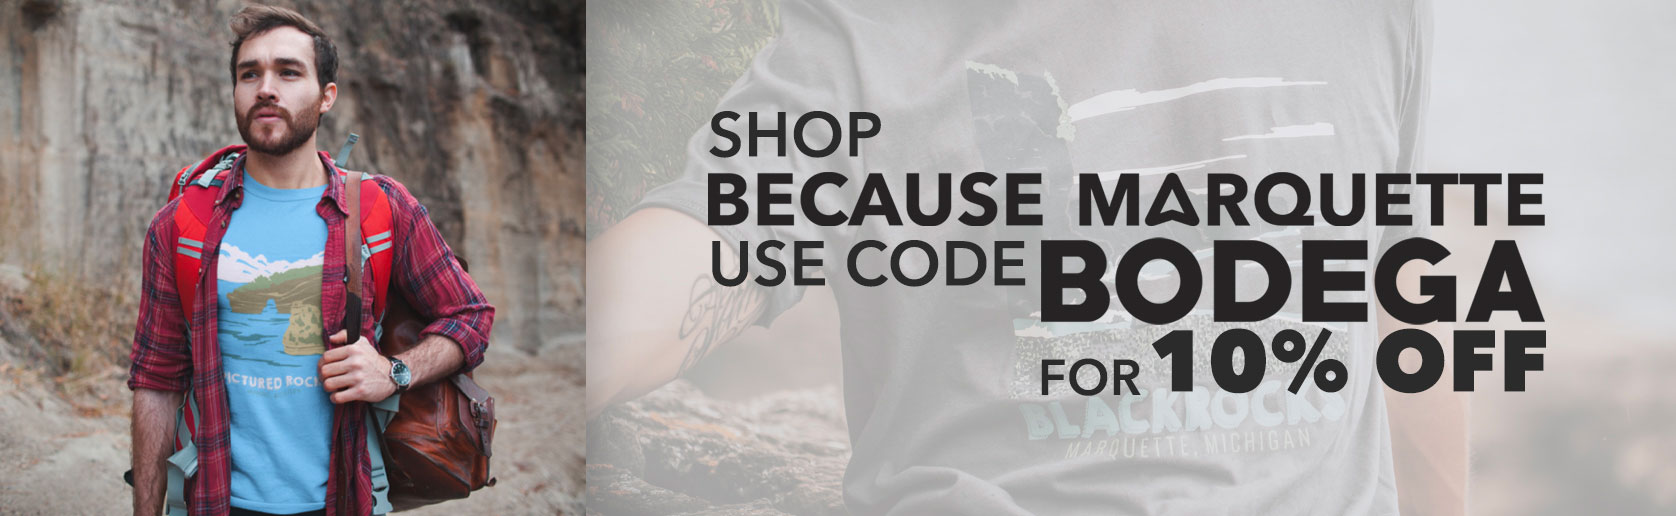 Use code BODEGA at becausemarquette.com for ten percent off your next order